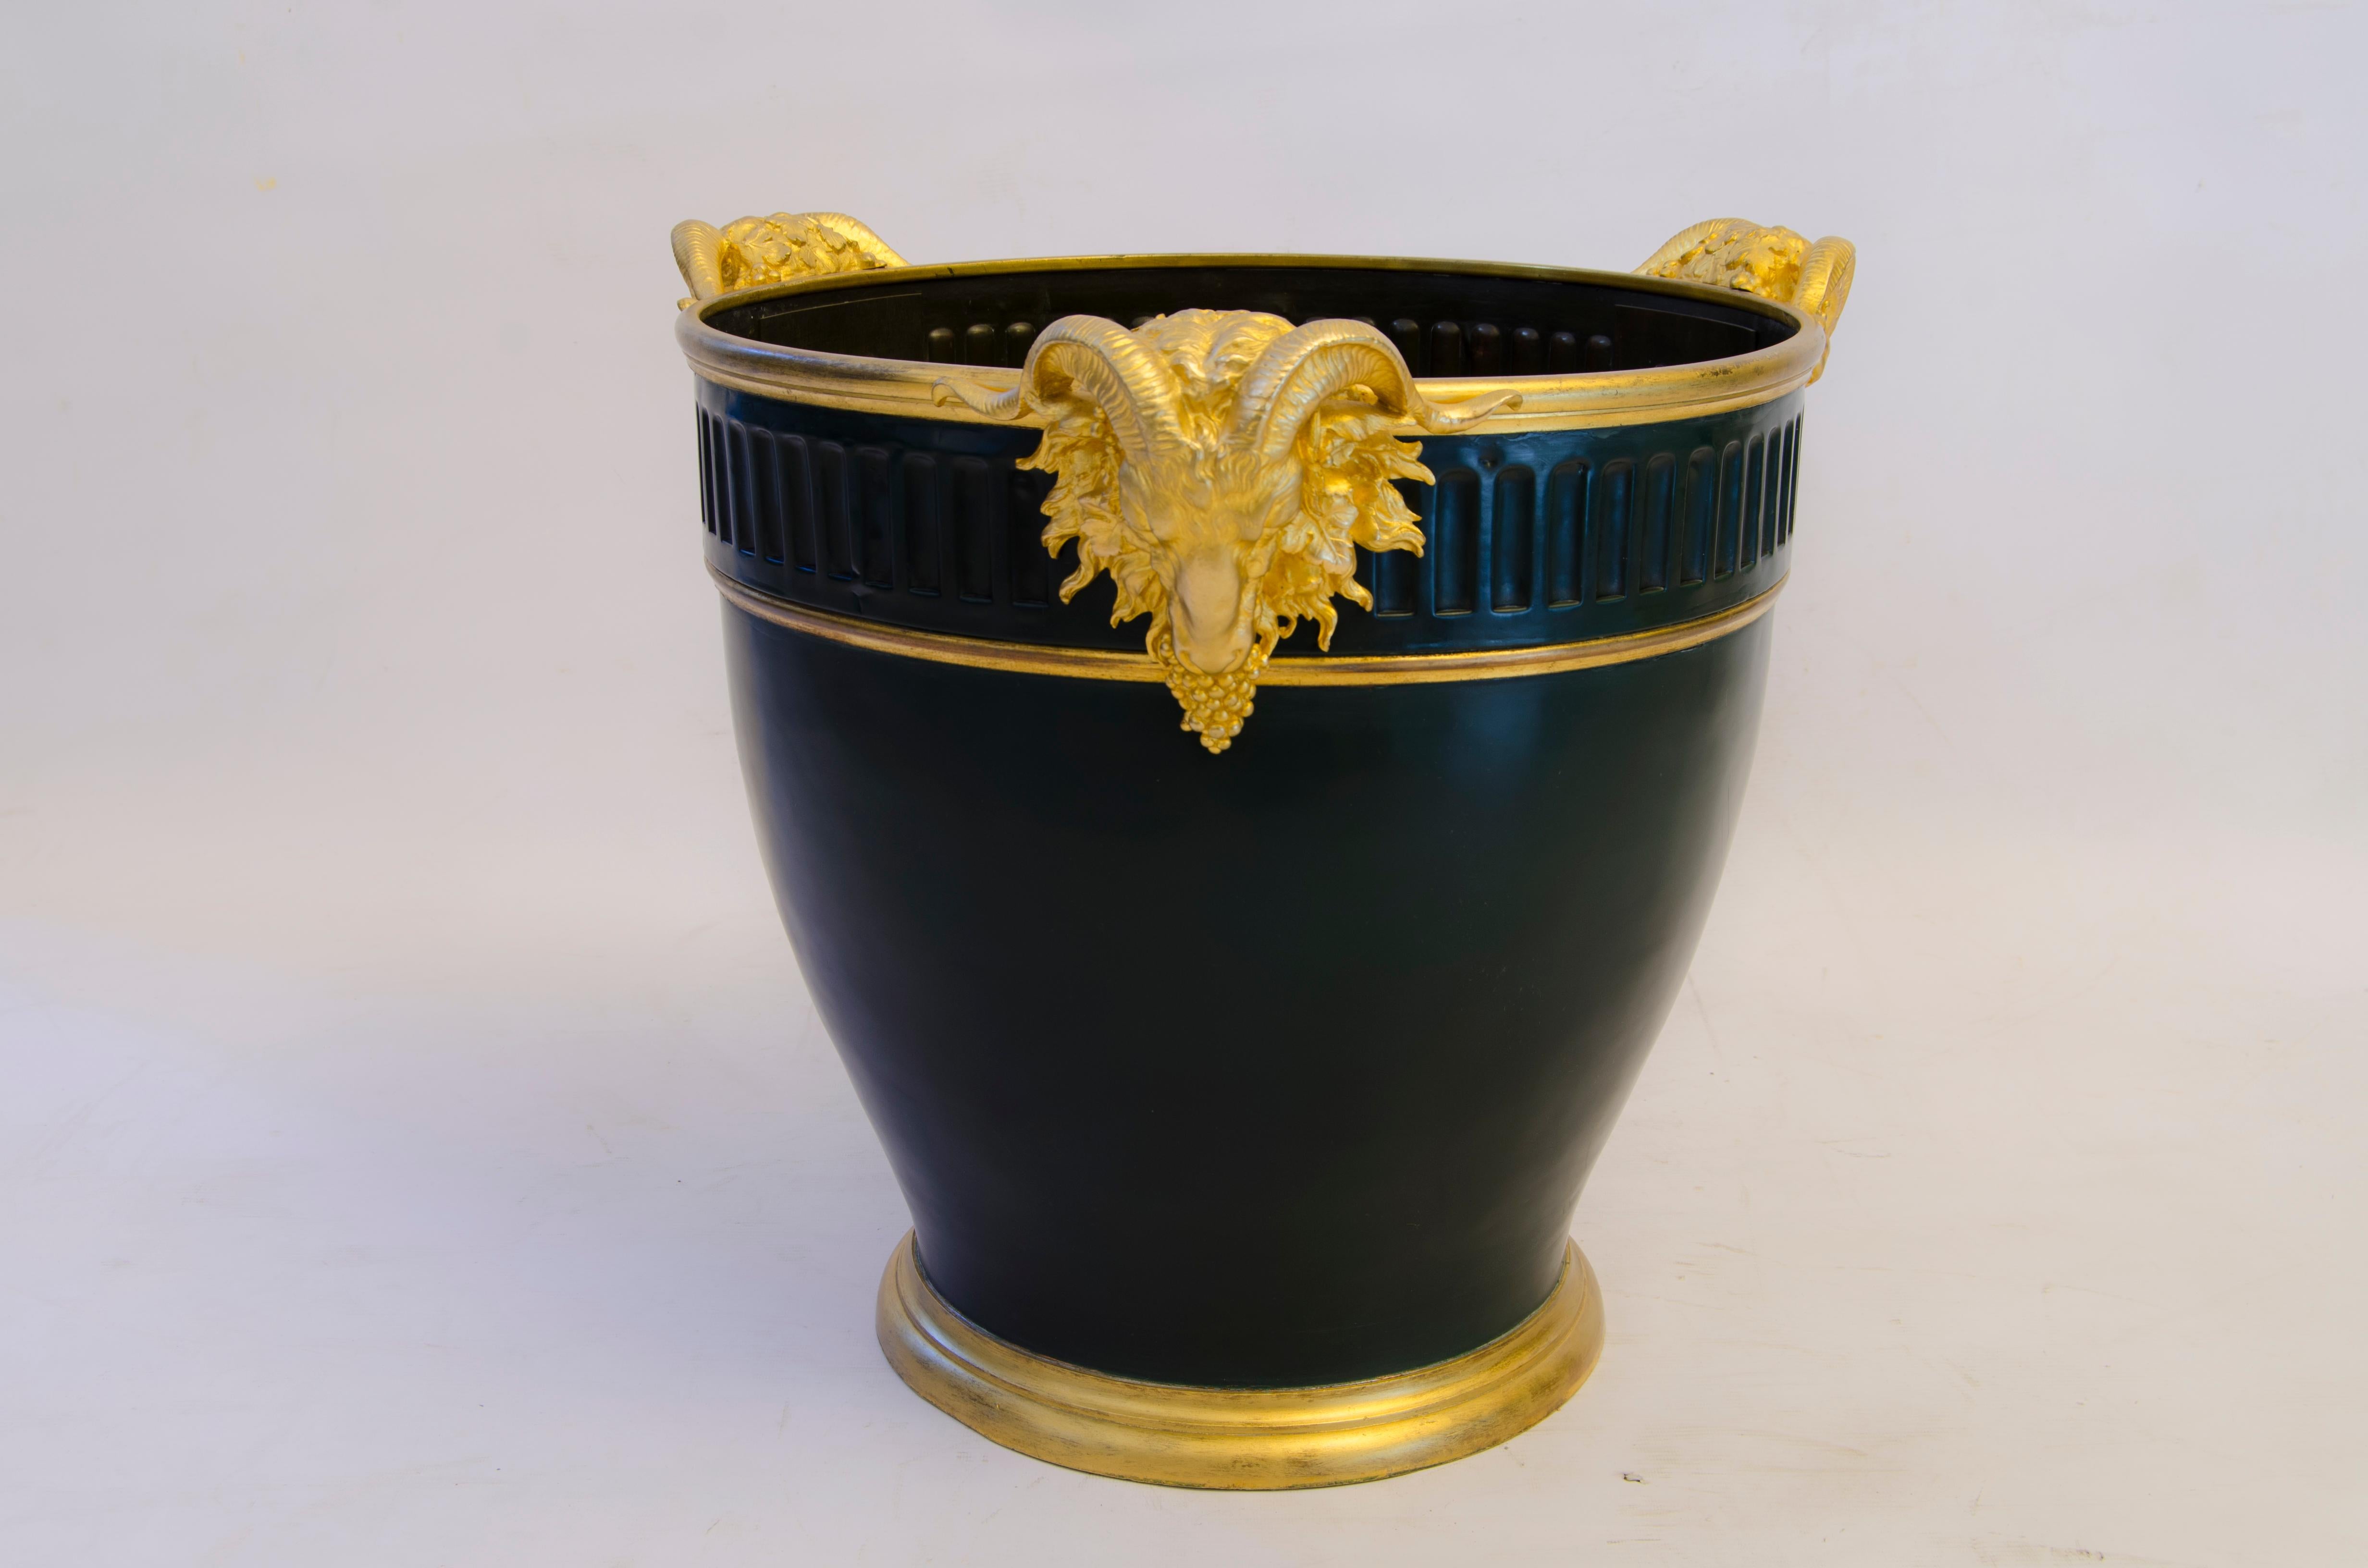 Cache-pot made of pompeian green patinated bronze with decorations of fauns and gold mercury details. Made by Charles Christofle (1805-1863), in the 19th century, Napoleon 3rd style. Signed CHRISTOFLE ET CIE ORFEVRES.

Its factory was inaugurated